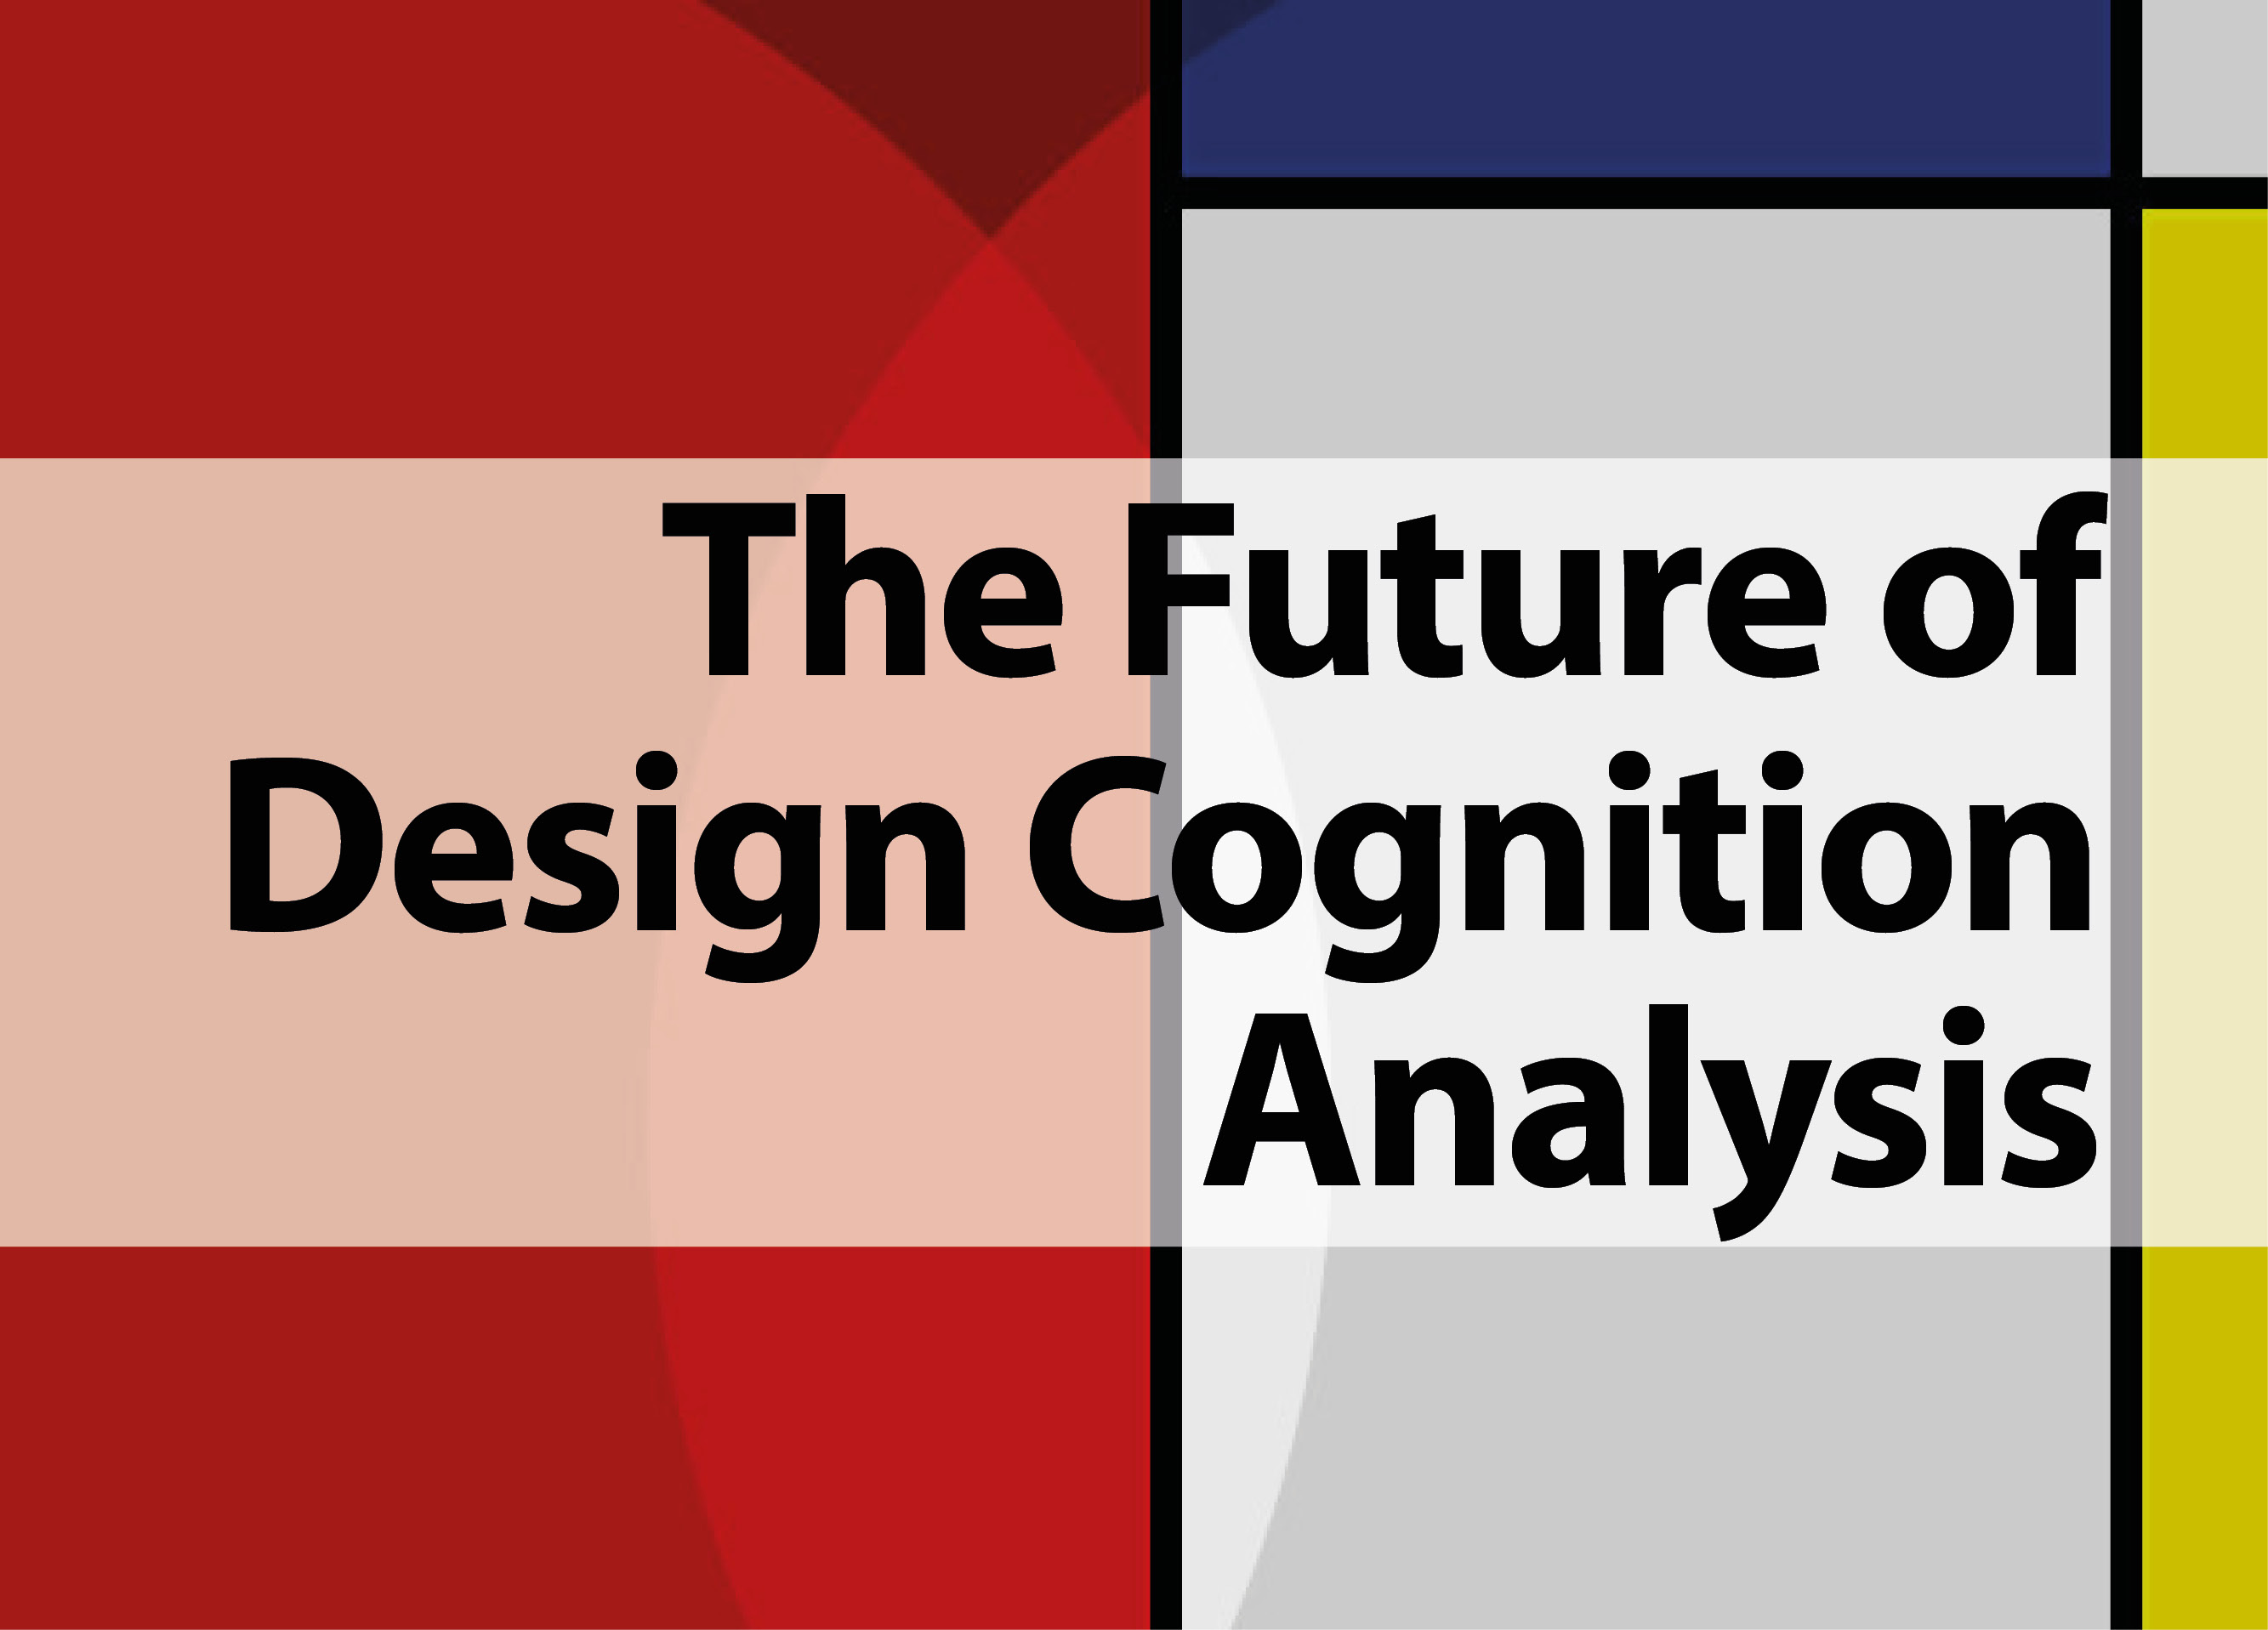 The Future of Design Cognition Analysis